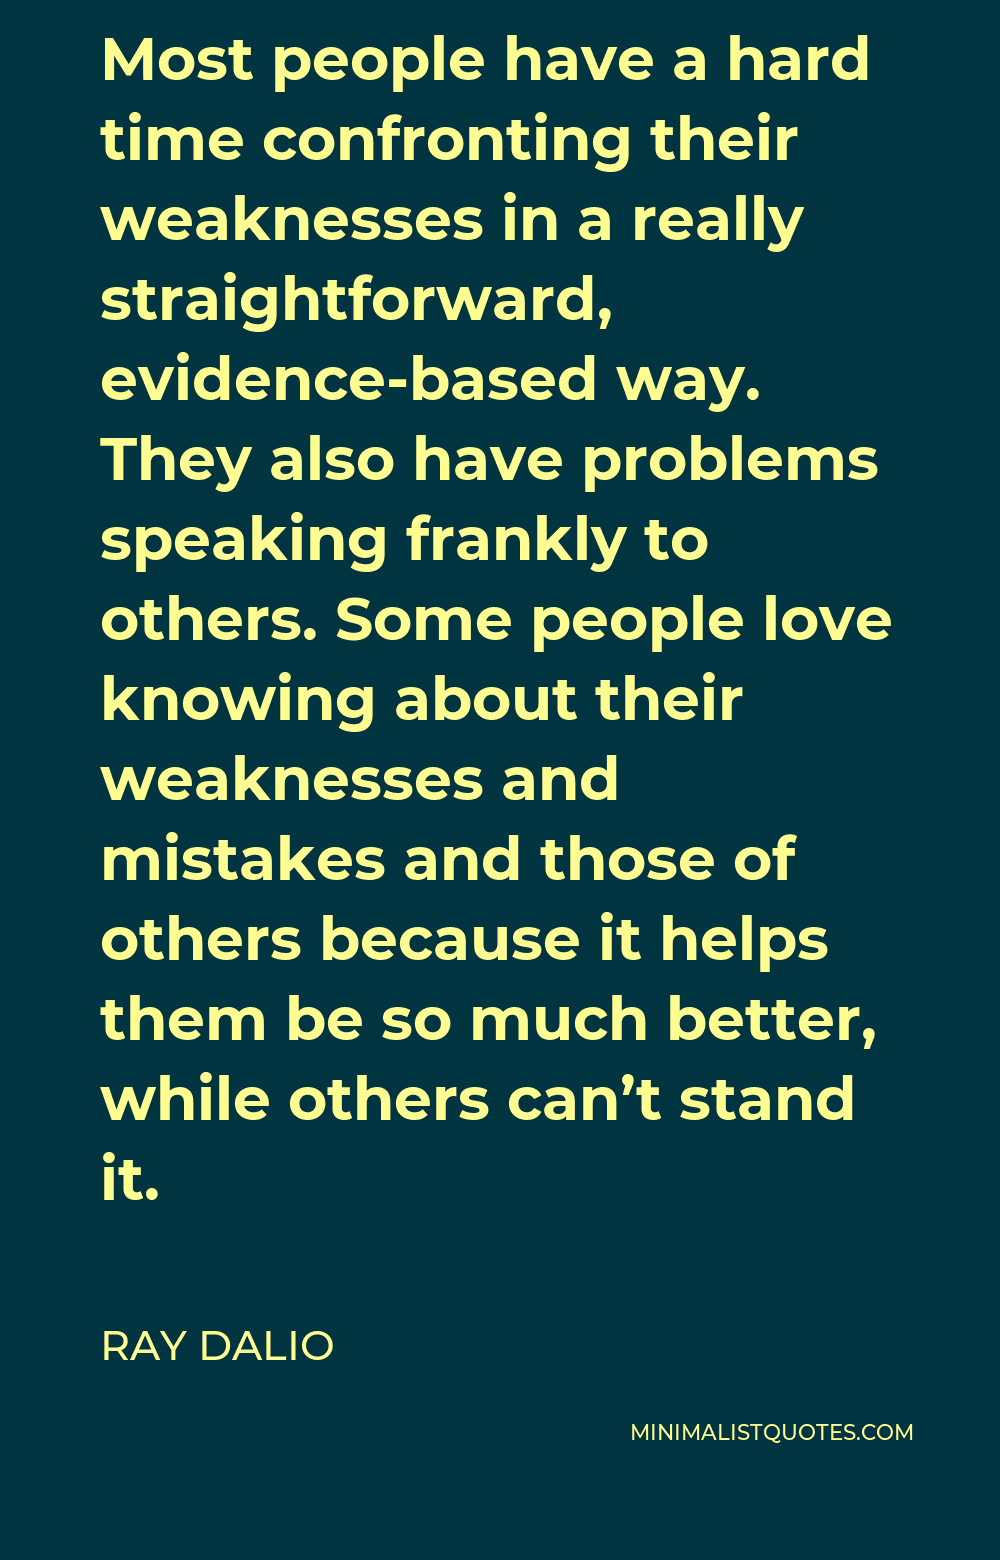 Ray Dalio Quote - Most people have a hard time confronting their weaknesses in a really straightforward, evidence-based way. They also have problems speaking frankly to others. Some people love knowing about their weaknesses and mistakes and those of others because it helps them be so much better, while others can’t stand it.